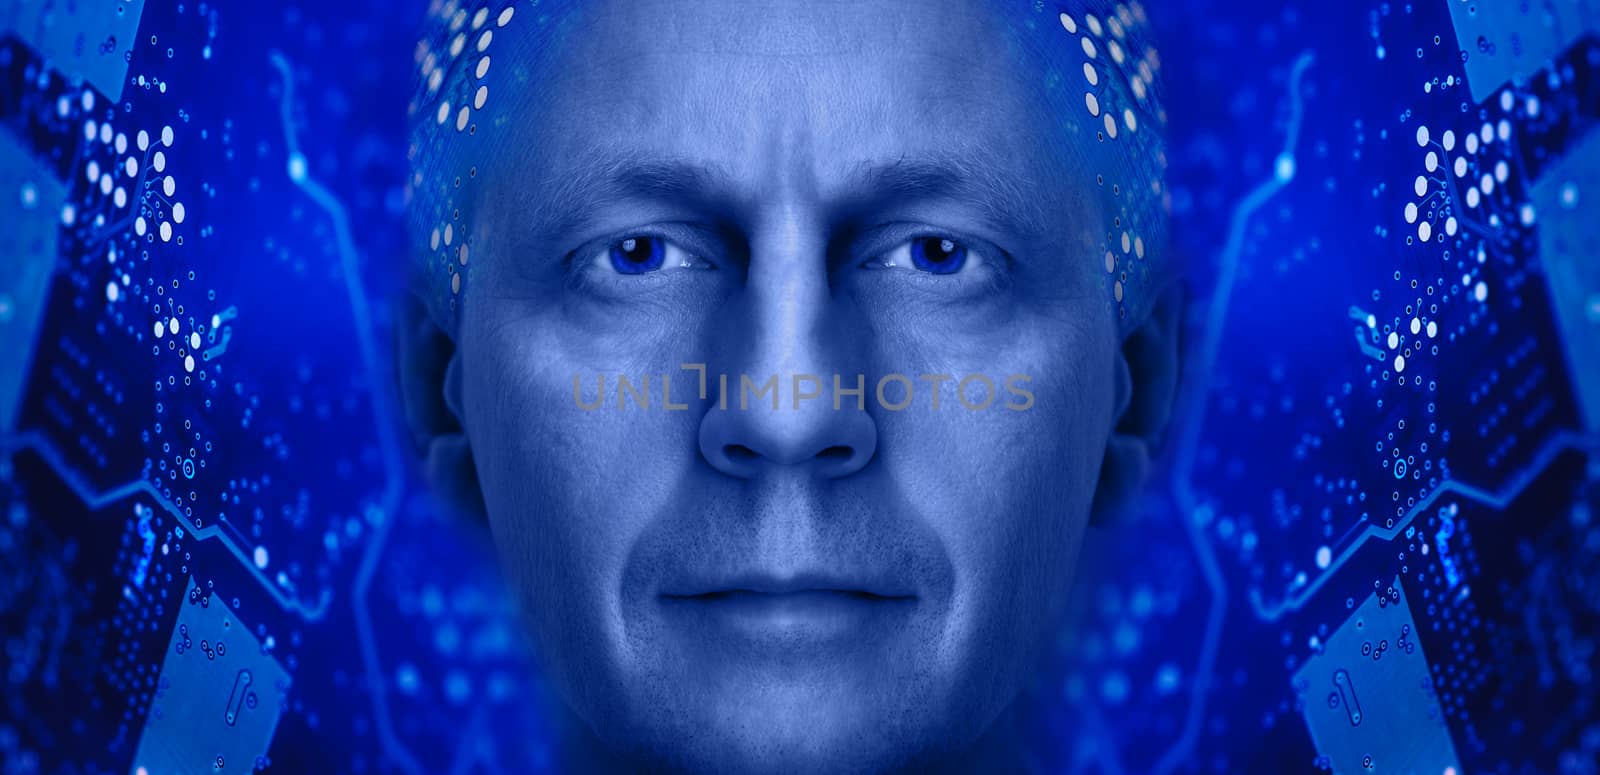 Men portrait on a electronic circuit board background. Toned blue.